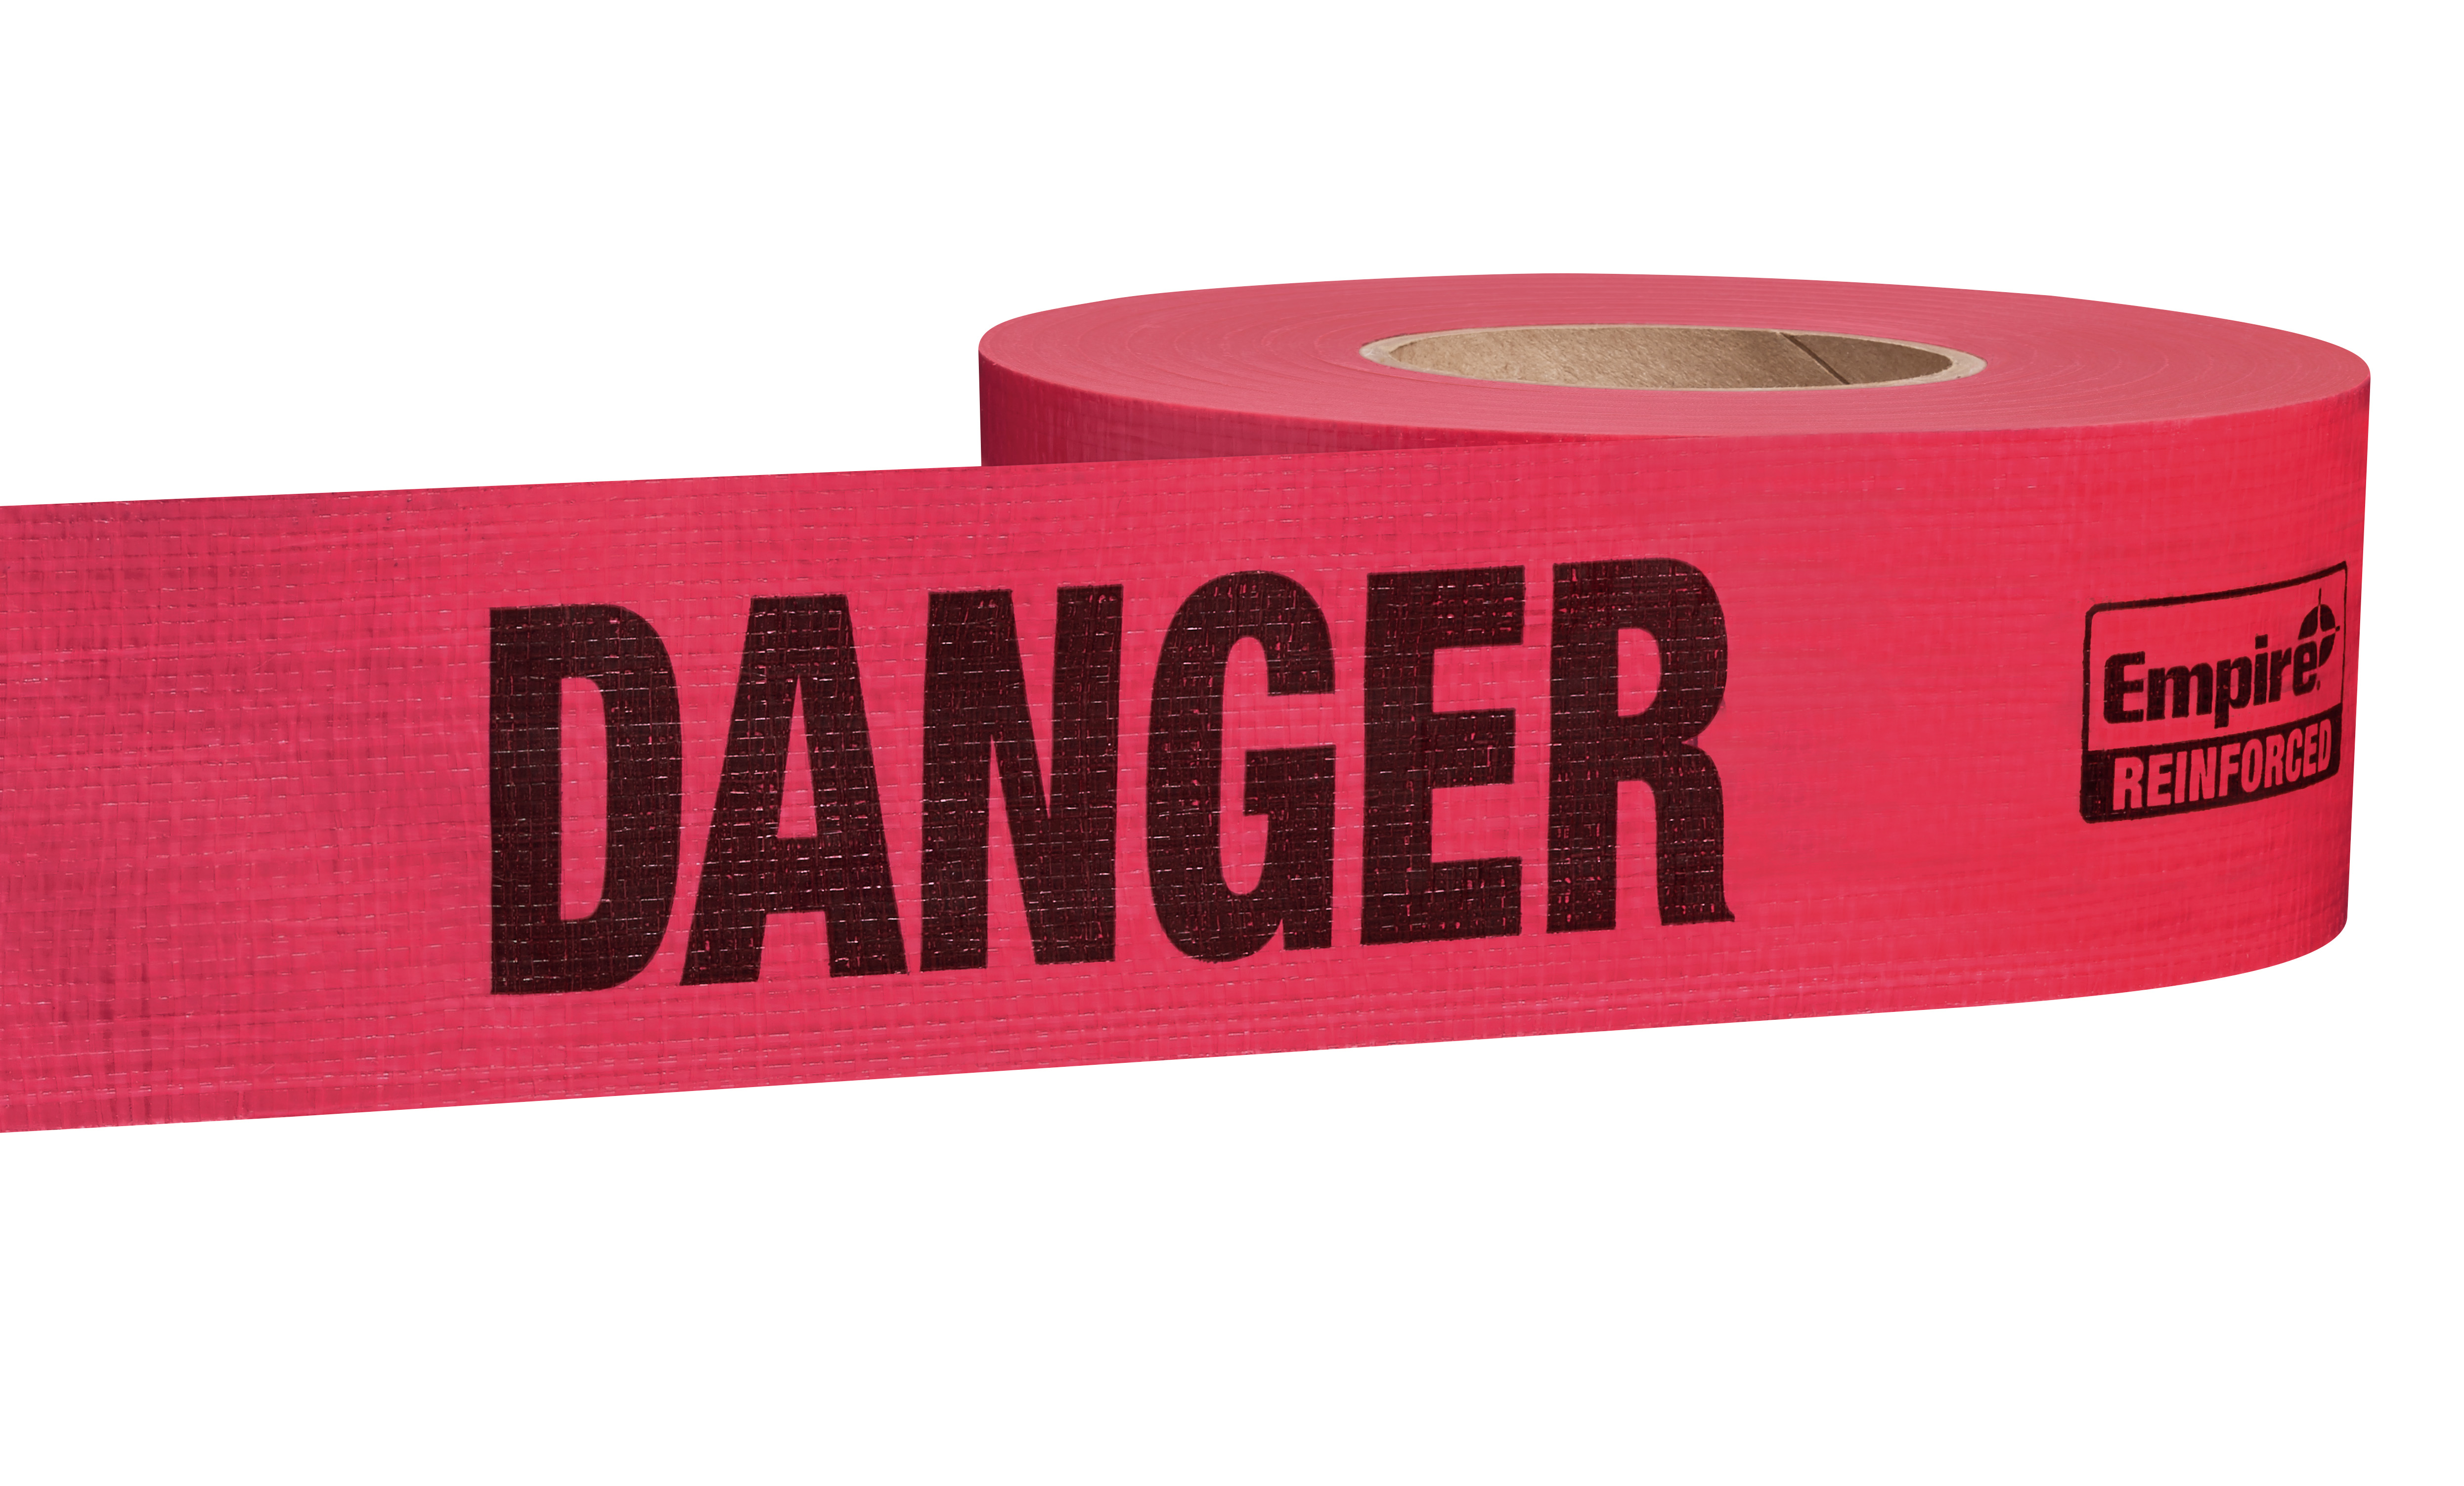 DuraGuard woven premium reinforced barricade tape is used for setting off areas under construction, parking lot sections, or dangerous areas that require warnings. Brightly colored with bold, black message in 2 in. letters on red tape. Empire 77-0604 danger tape is durable and reusable to keep sites safe. Barricade tape is used by professionals in law enforcement, safety, construction, painting, mining, hardware and utilities. This warning labeled tape utilizes a disposable, economical marking solution to ensure that all necessary caution warnings are given. We ensure its consistency by using virgin resigns to ensure longest lasting/most durable tape available. The cross-woven reinforced polyethylene is 16 times stronger than regular barricade tapes and long distances between tie points are no problem for this barricade tape.